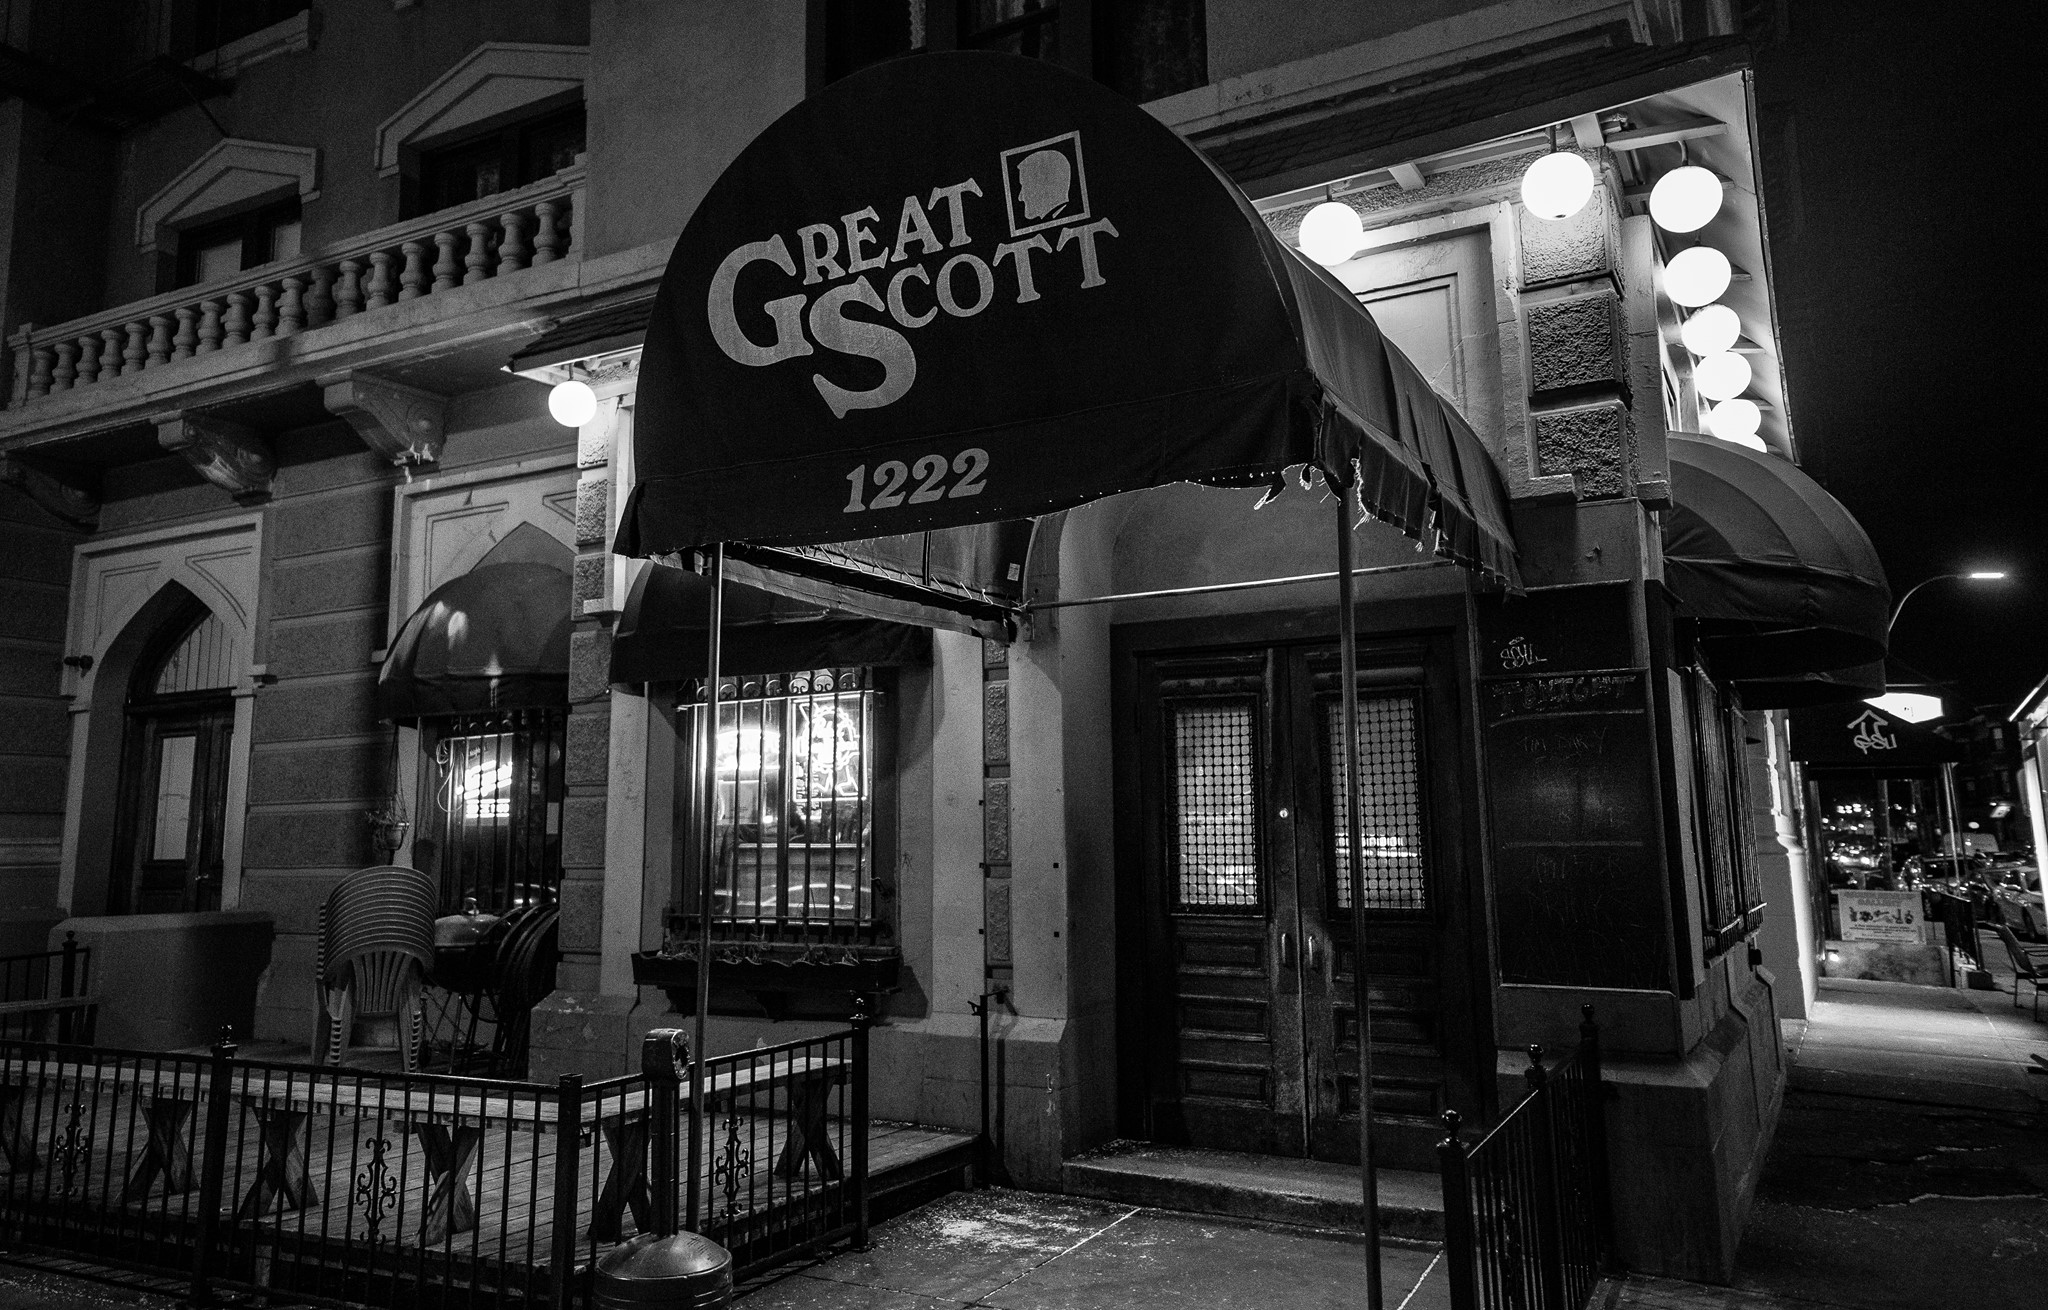 Exterior of a bar, with the name Great Scott written on the awning. The photo is black and white.